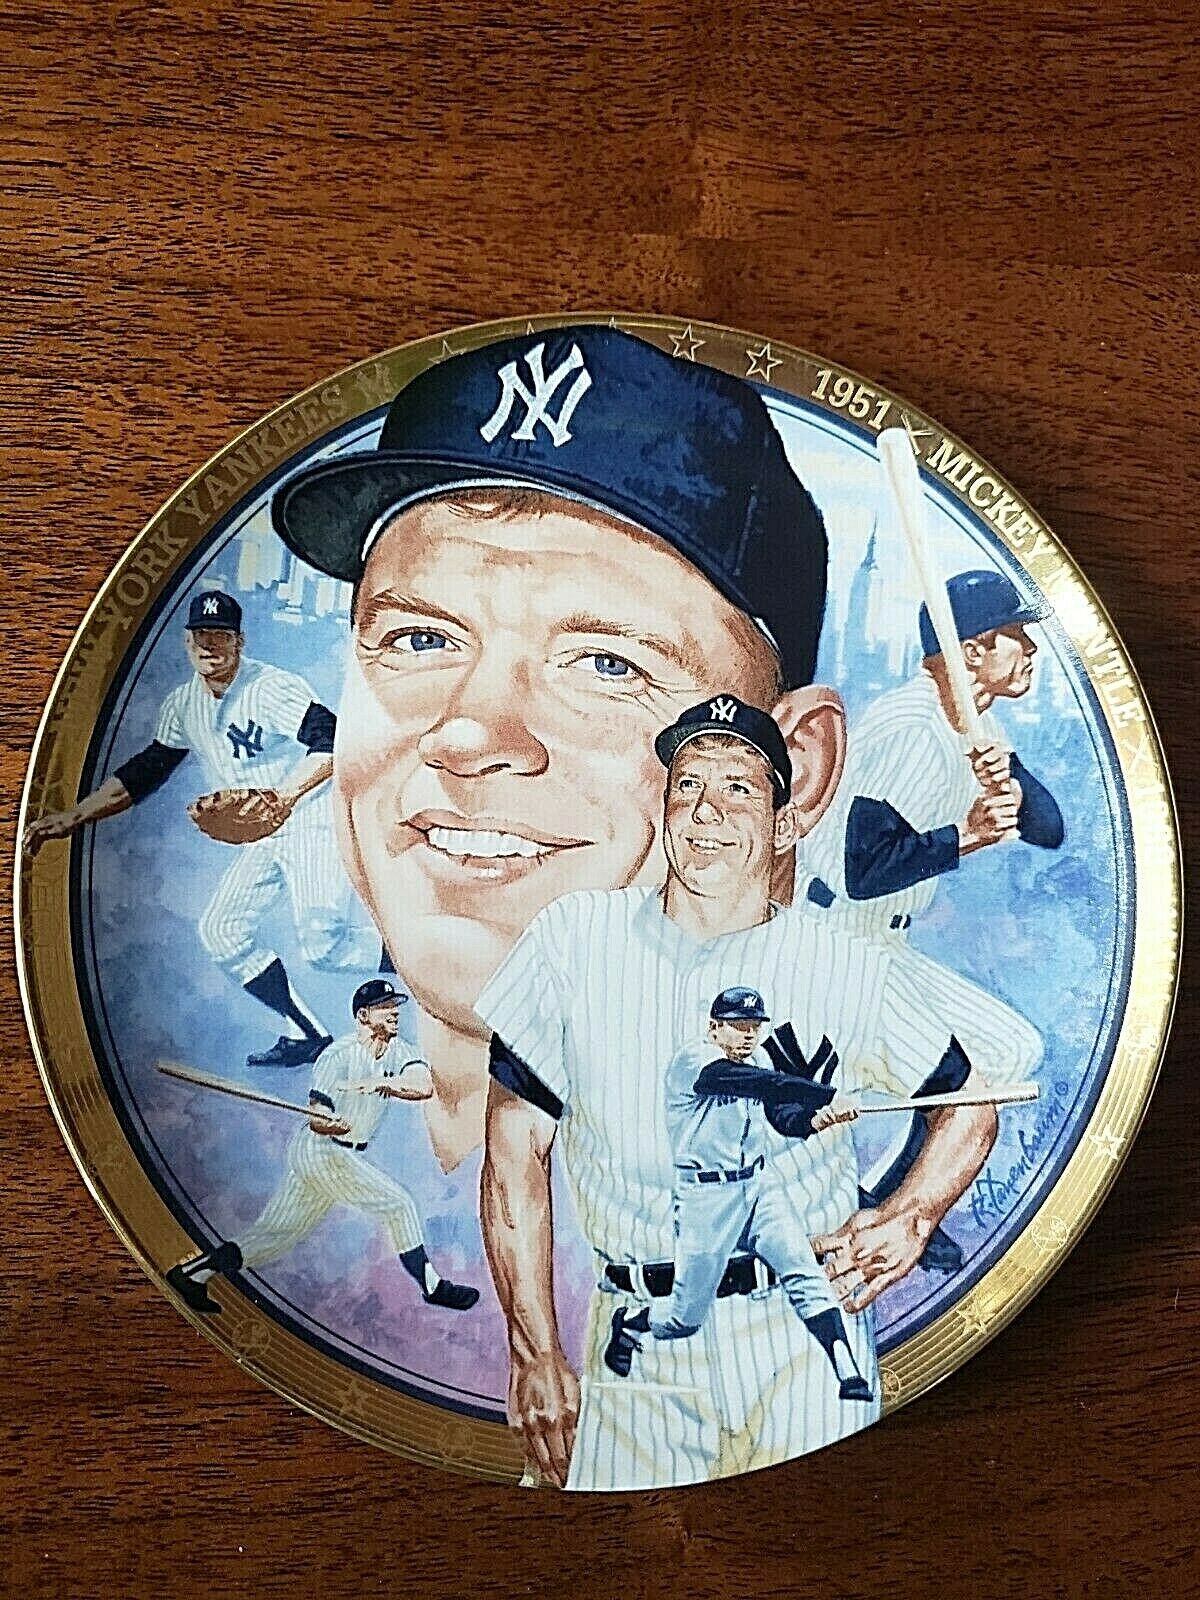 Hamilton Collection The Legendary Mickey Mantle Best Of Baseball Plate W/coa